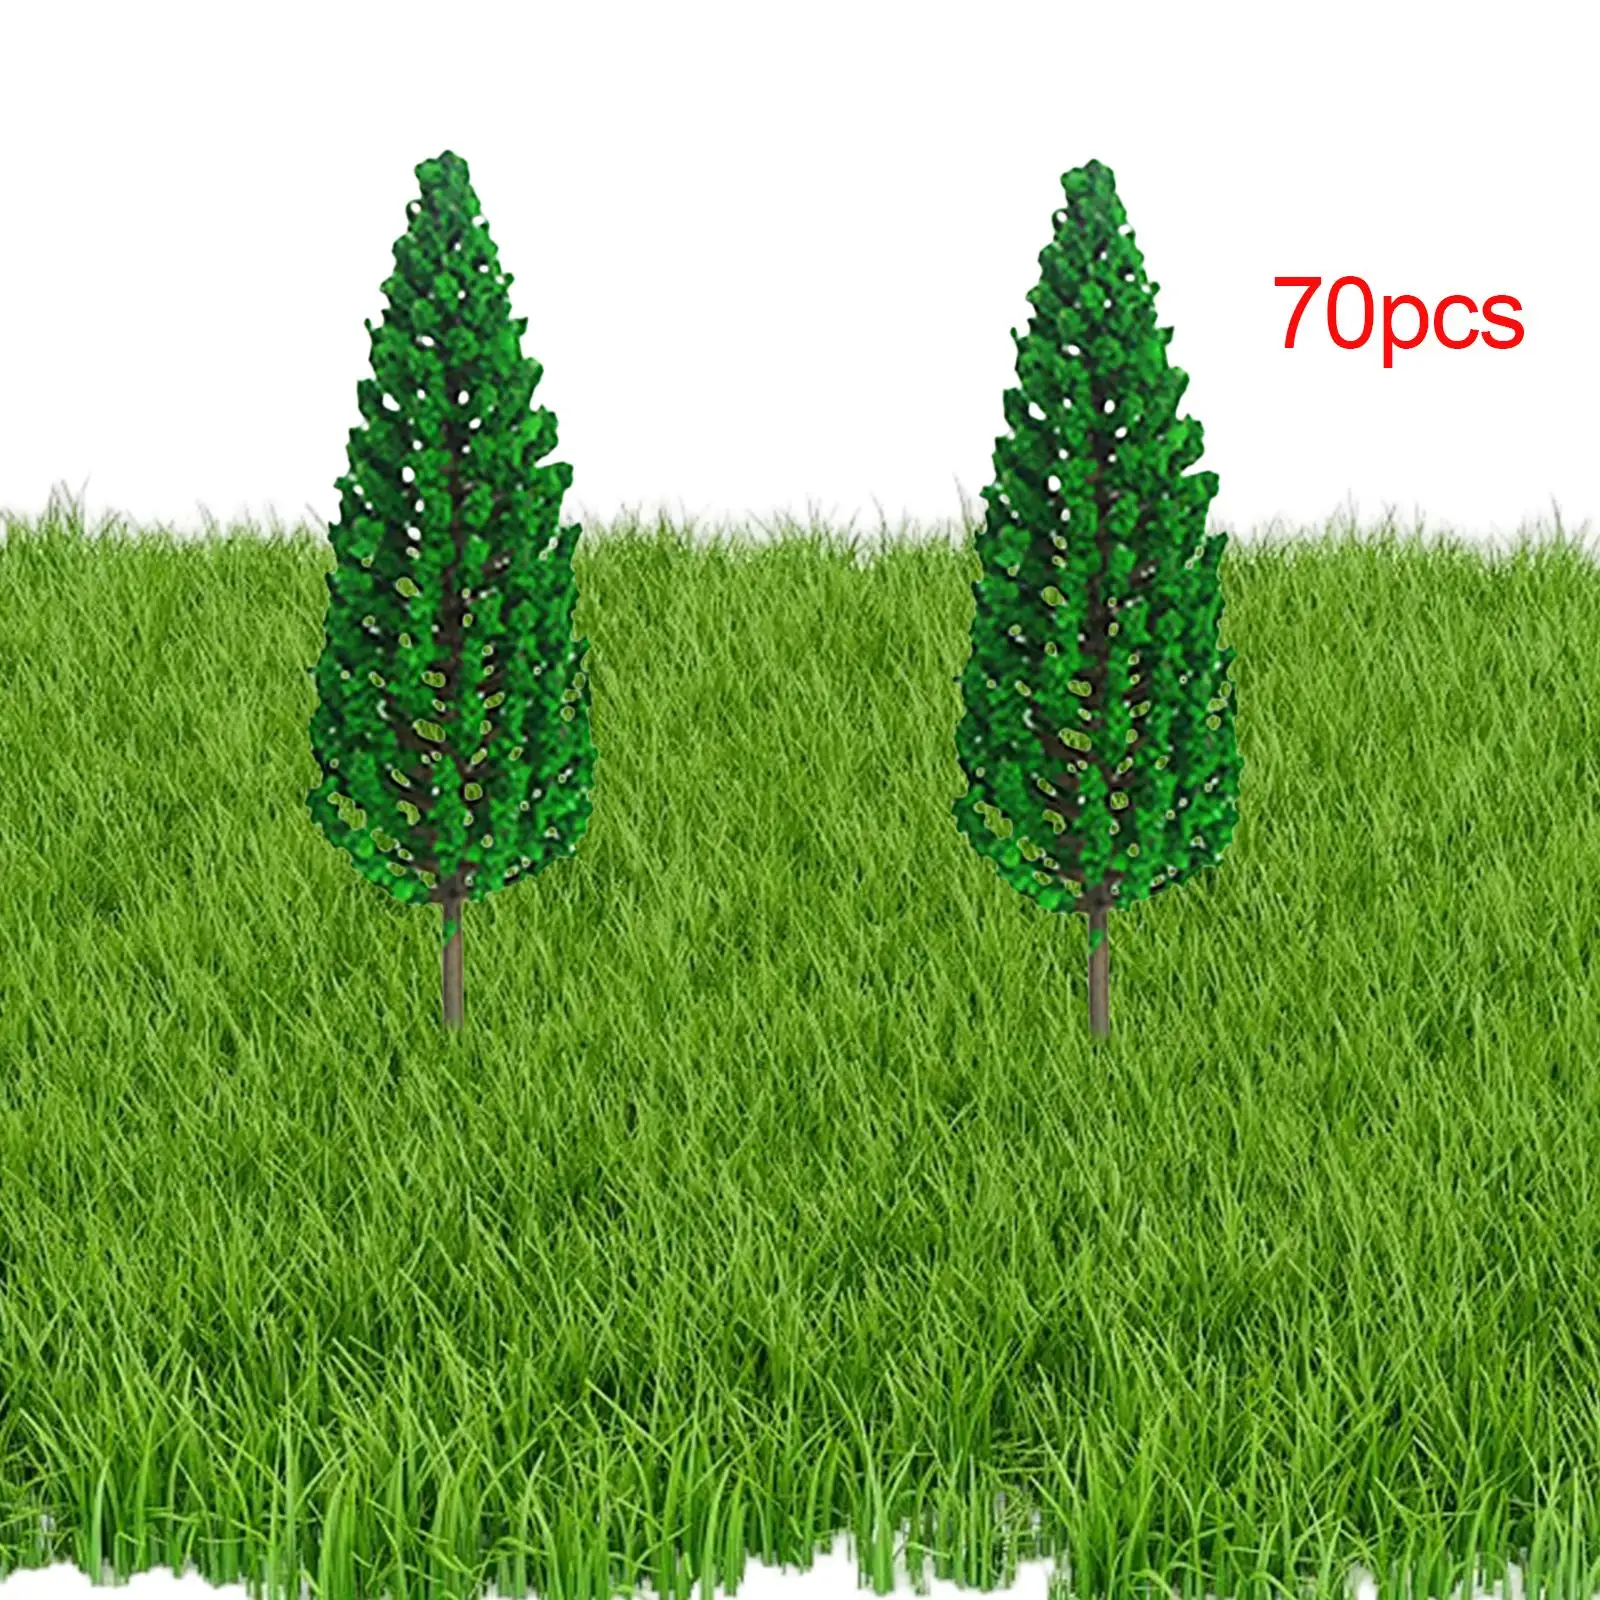 70Pcs Model Trees 1/300 Scale 6cm Diorama Tree Scenery Tree Train Scenery Architecture Trees for Sand Table Railroad DIY Crafts